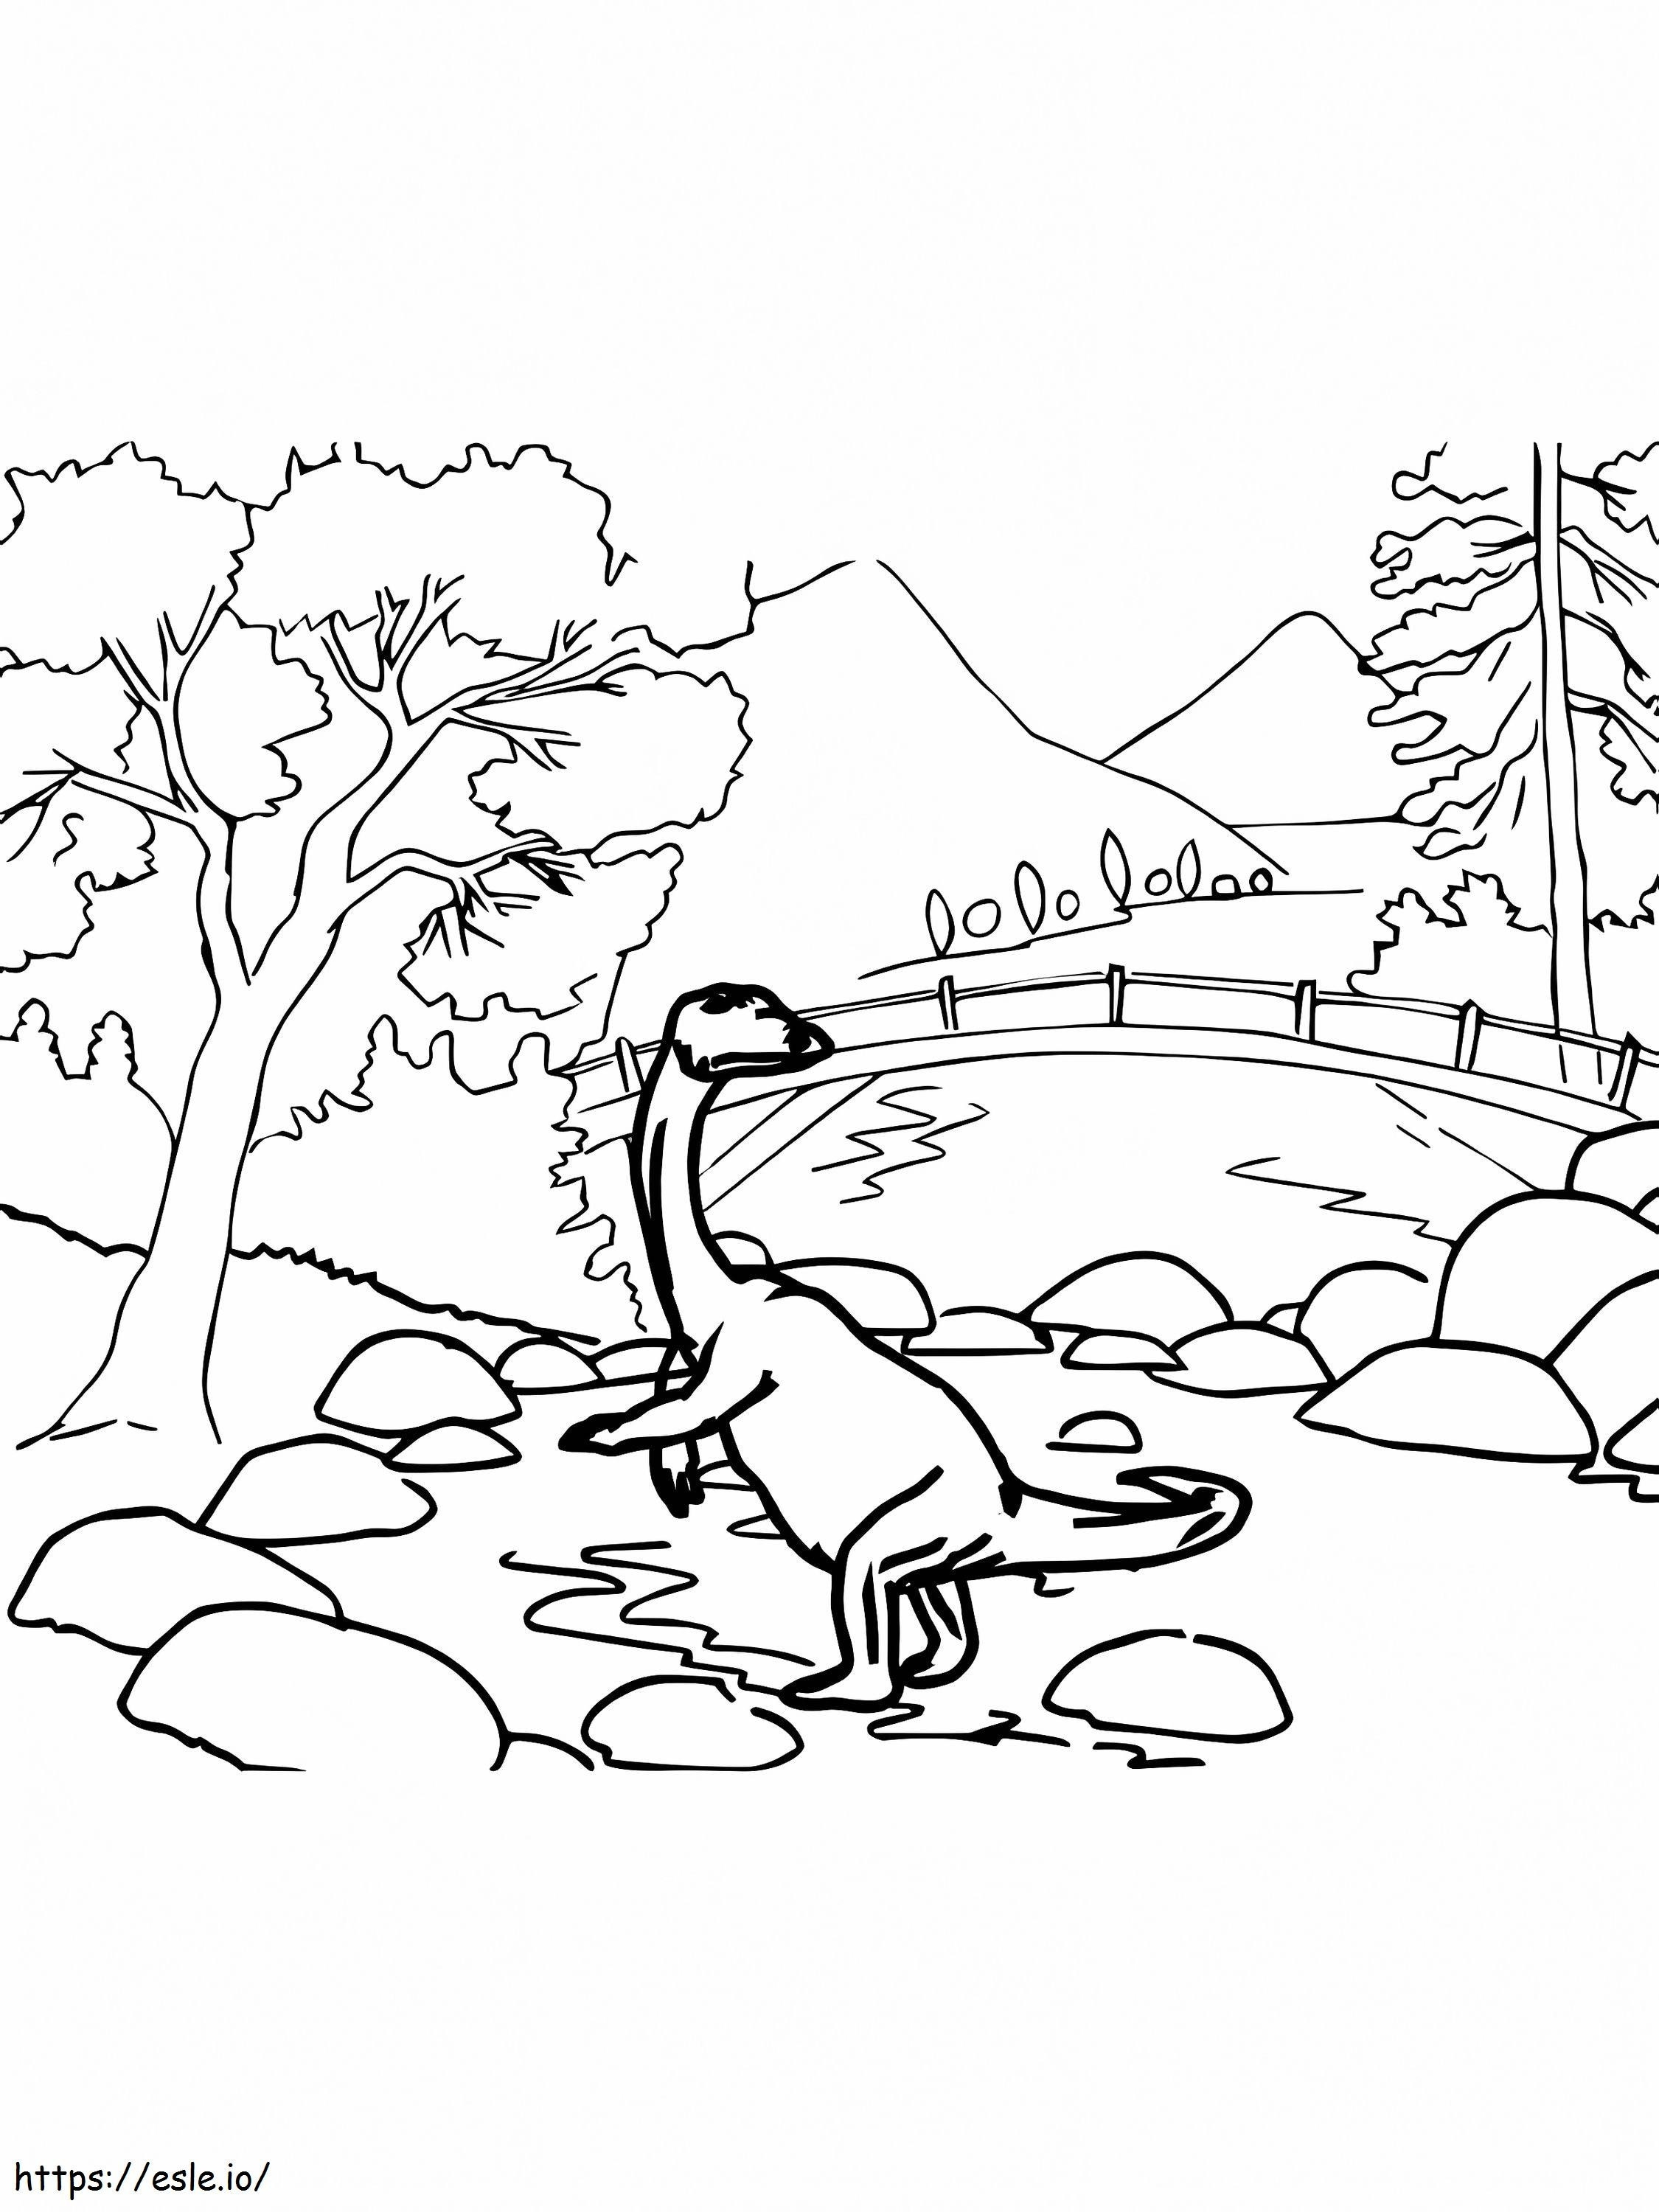 Saurischian Dinosaurs In Nature coloring page